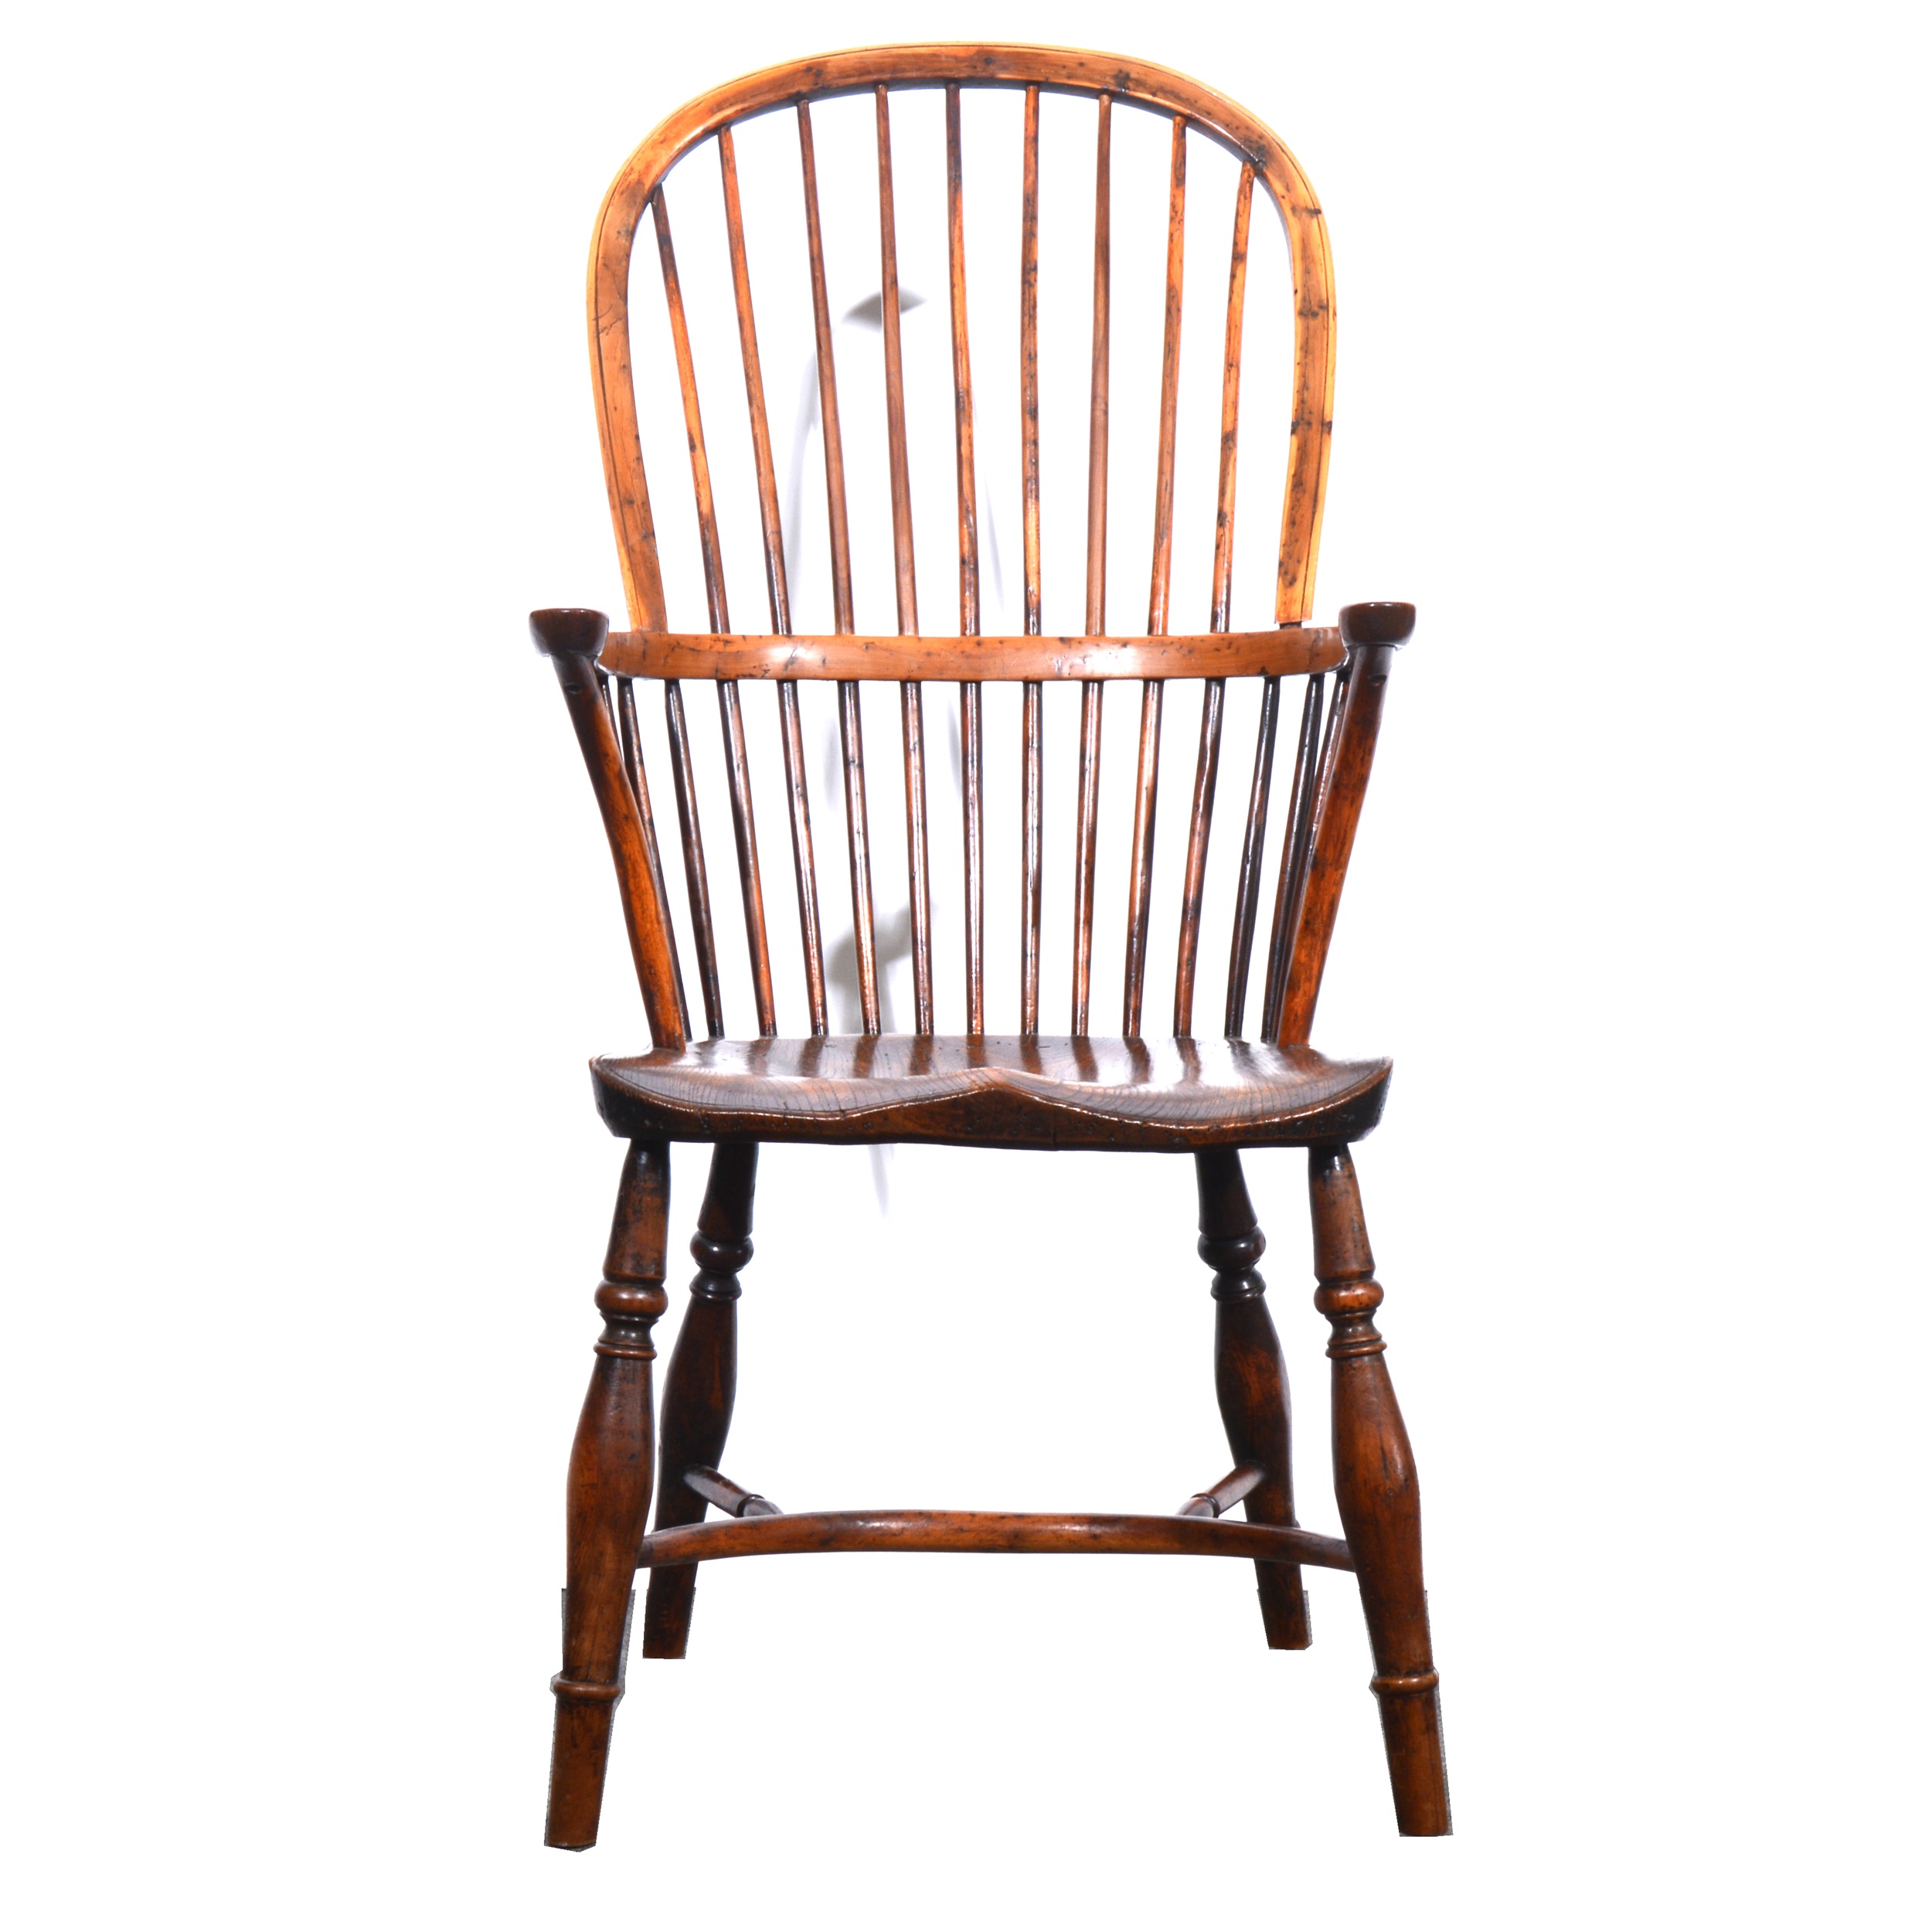 Victorian elm and yew Windsor chair, hoop-back with turned spindles, shaped boarded seat, turned